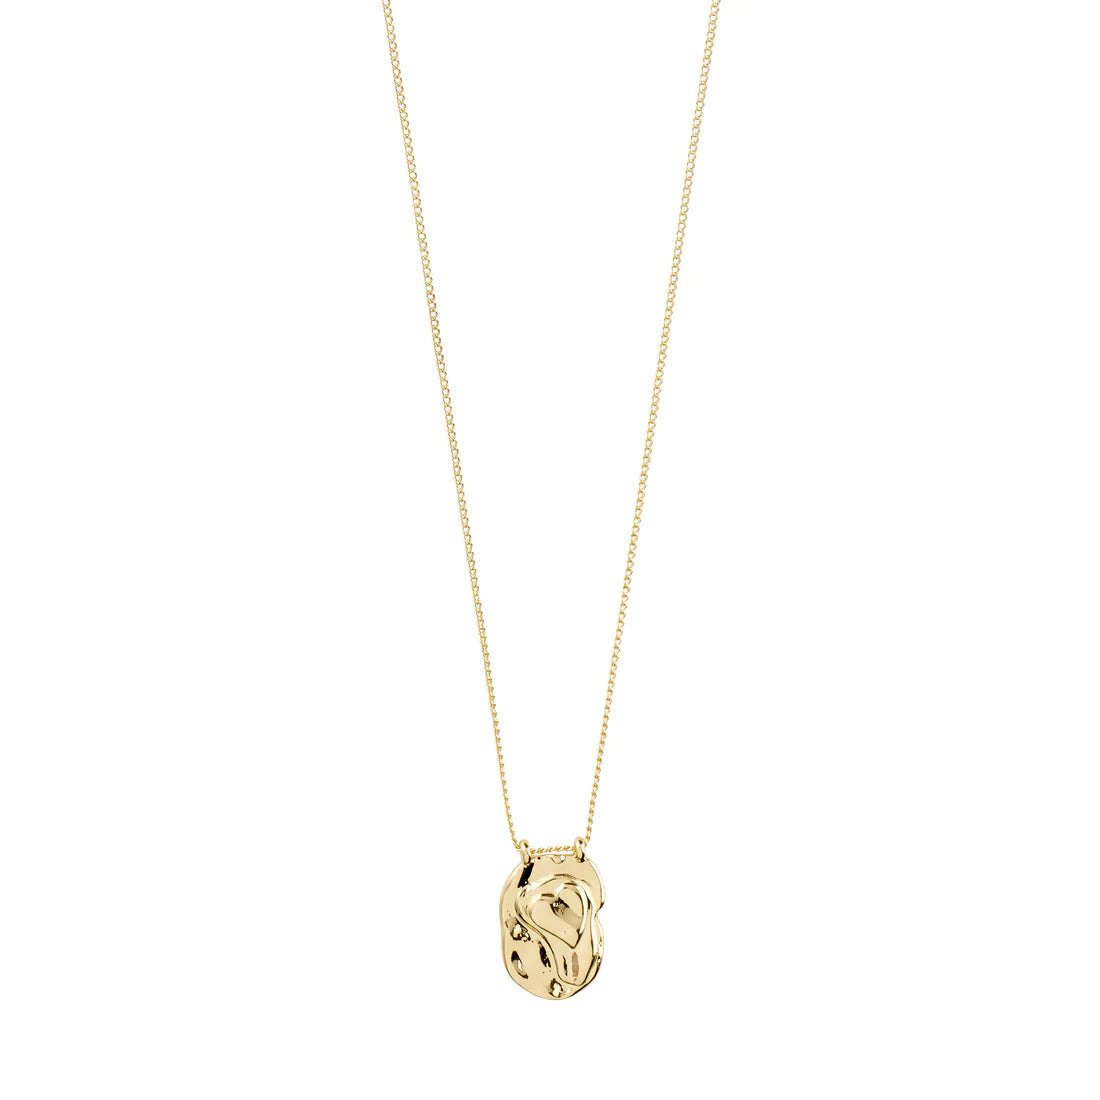 Peace organic shape pendant necklace gold-plated